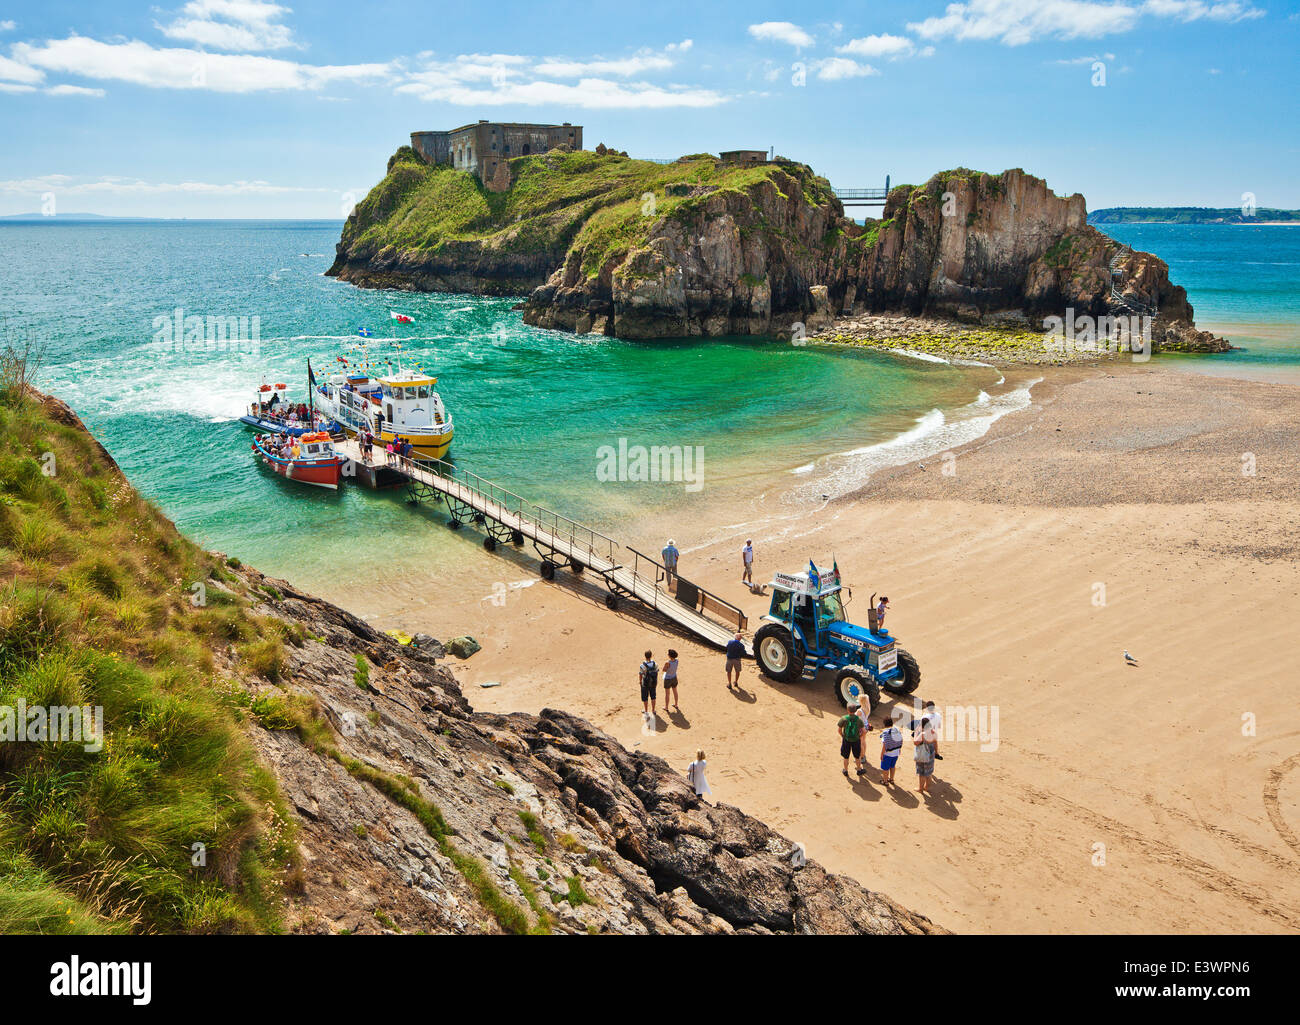 Gite in barca dal castello sands, St Catherines Isola, Tenby, Galles. Foto Stock